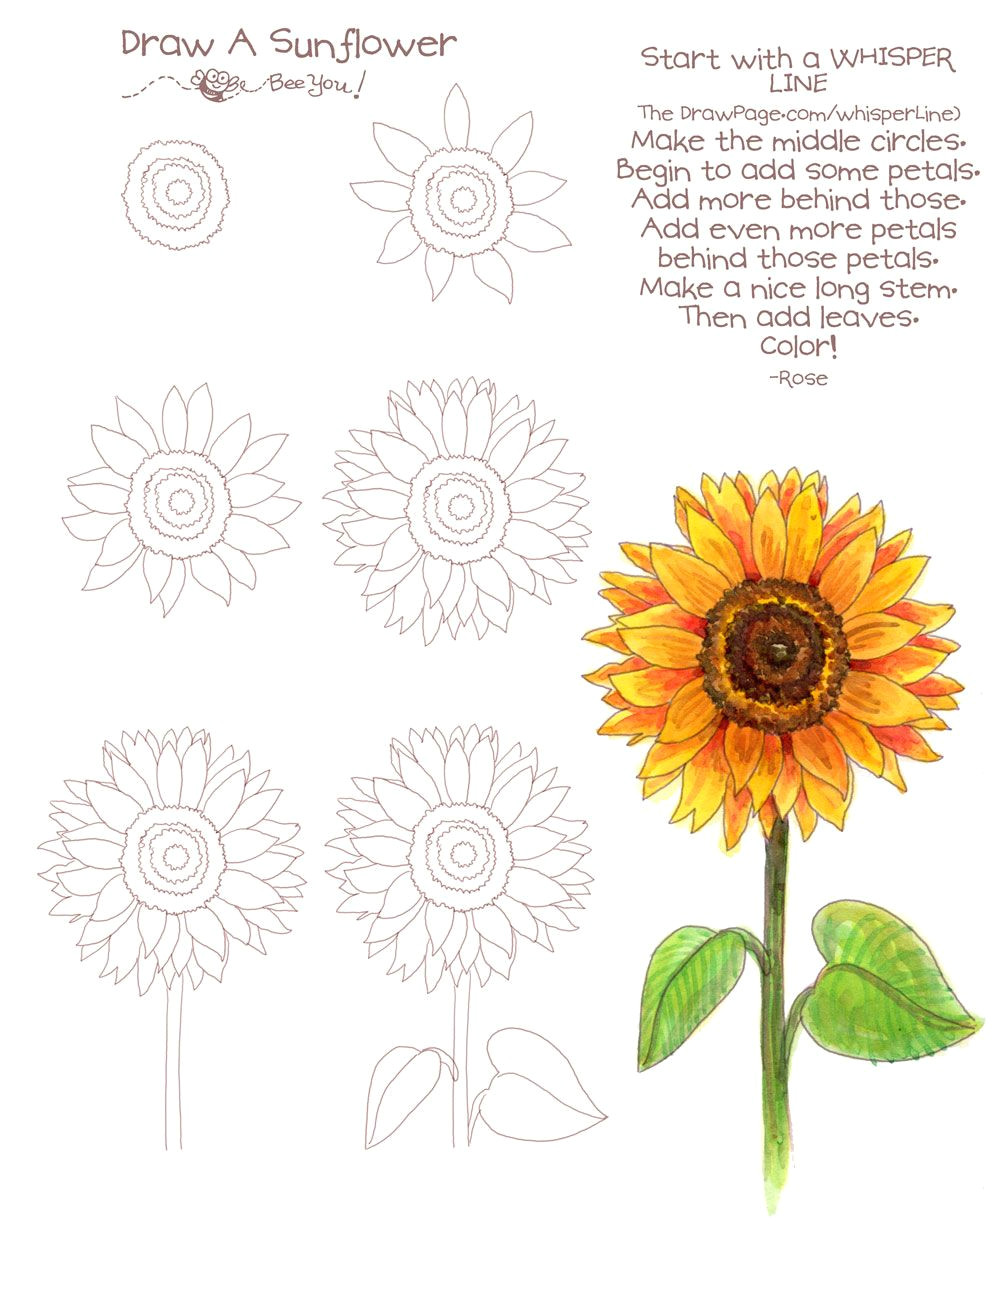 Flowers Garden Drawing Easy Drawing A Sunflower Draw Pages From thedrawpage Com Pinterest